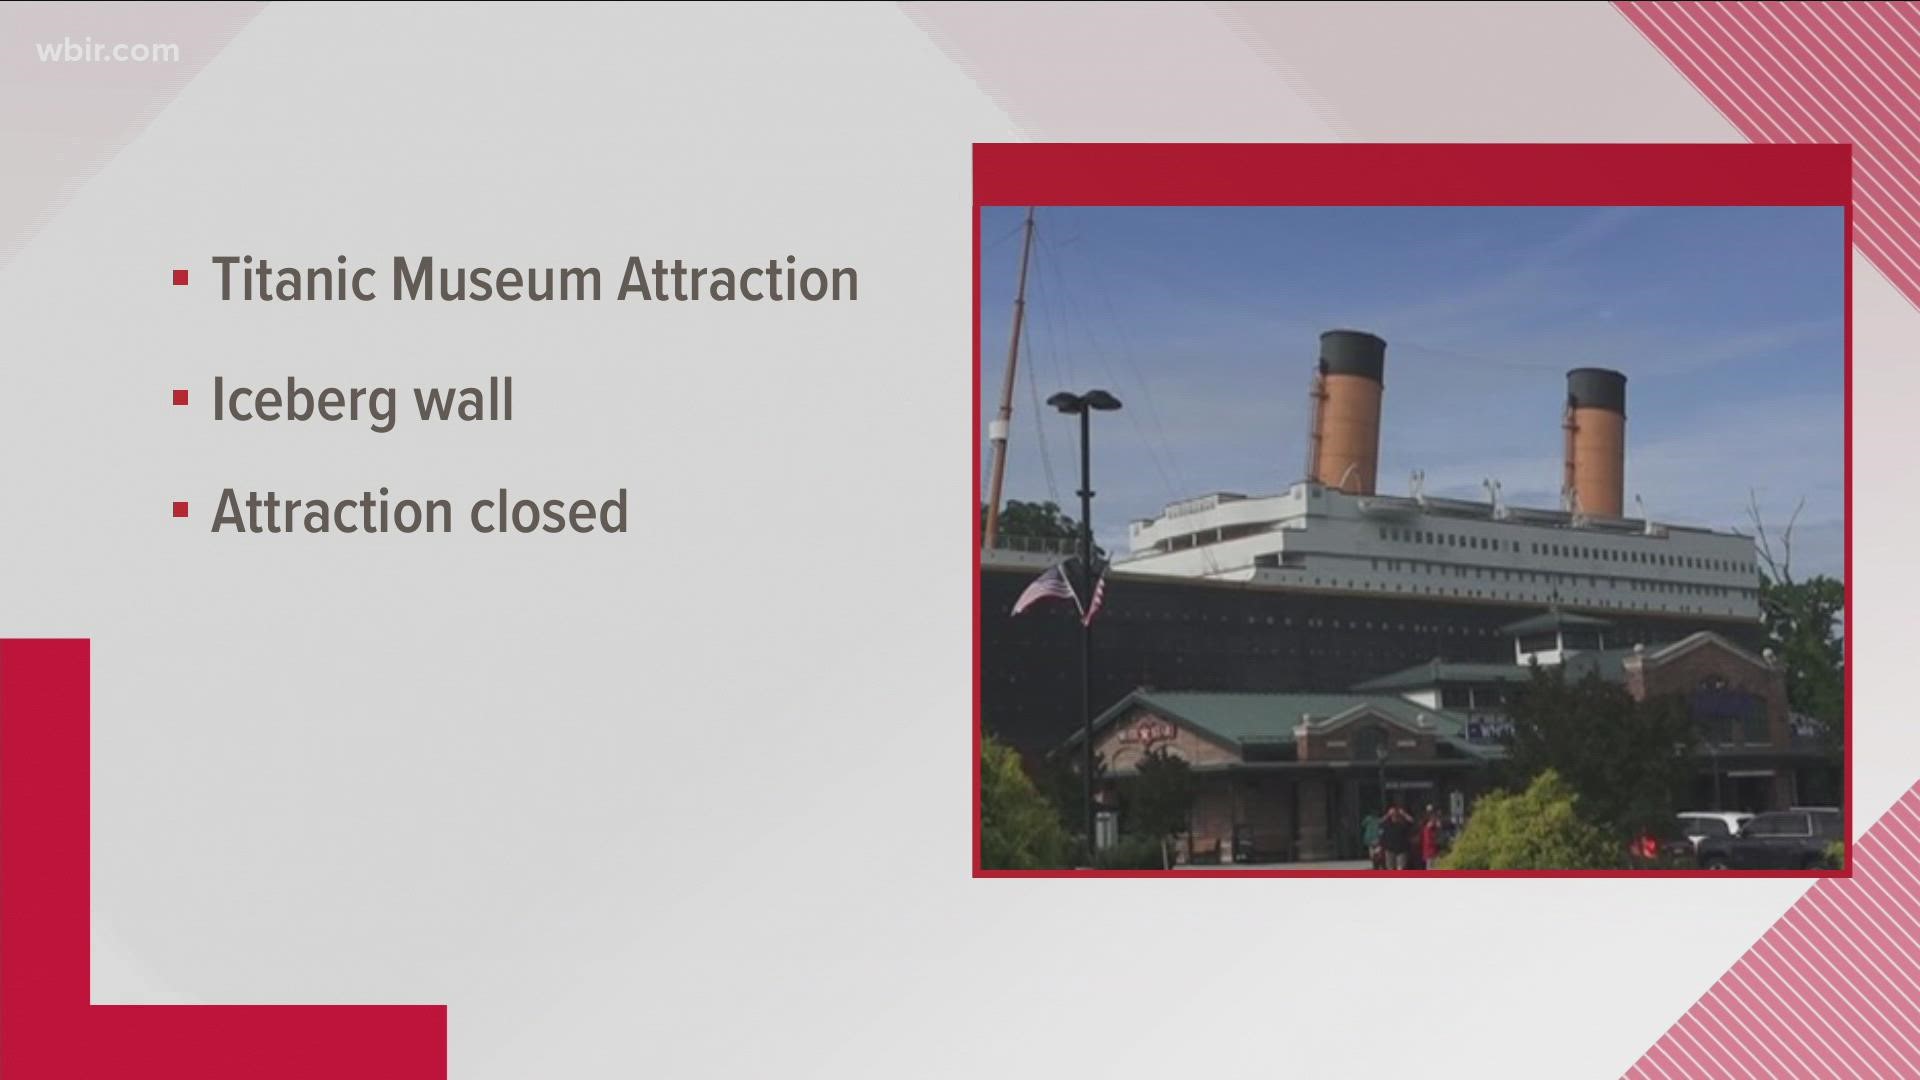 The Titanic Museum Attraction is closed after three people were injured by the iceberg wall. The guests were sent to the hospital.